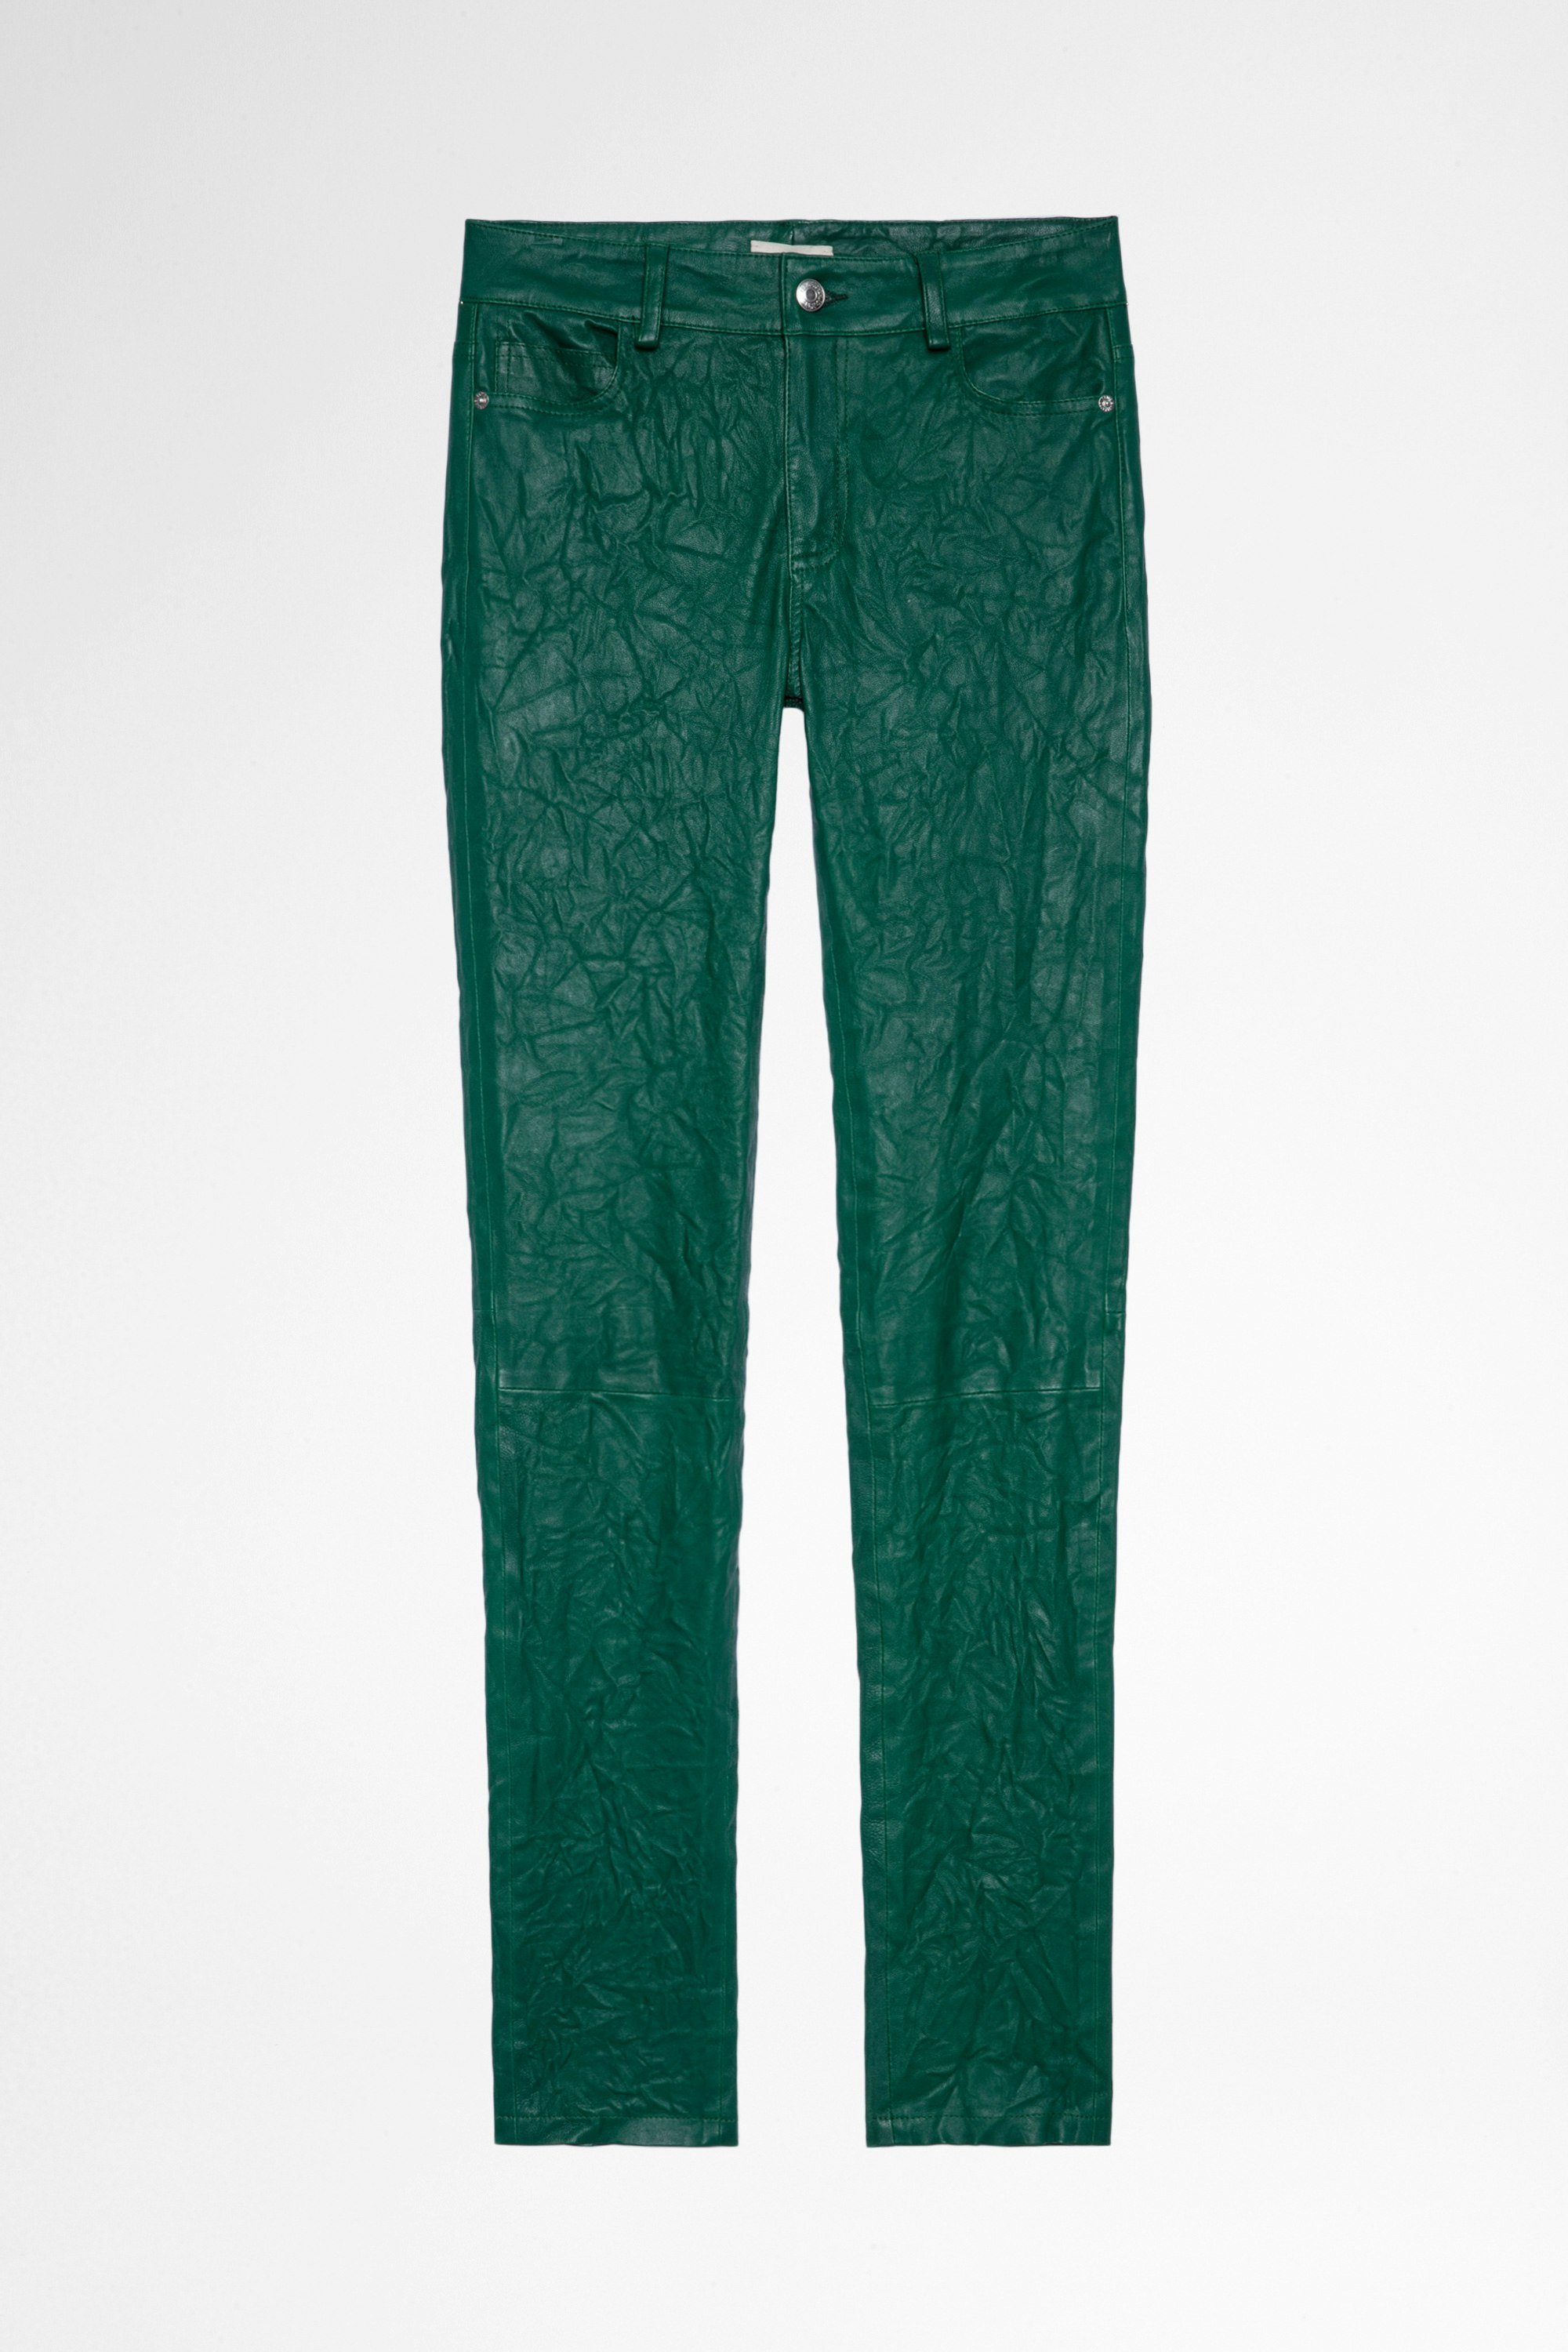 Phlame Creased Leather Trousers Women's green crinkled leather pants. Buying this product, you support a responsible leather production through Leather Working Group.